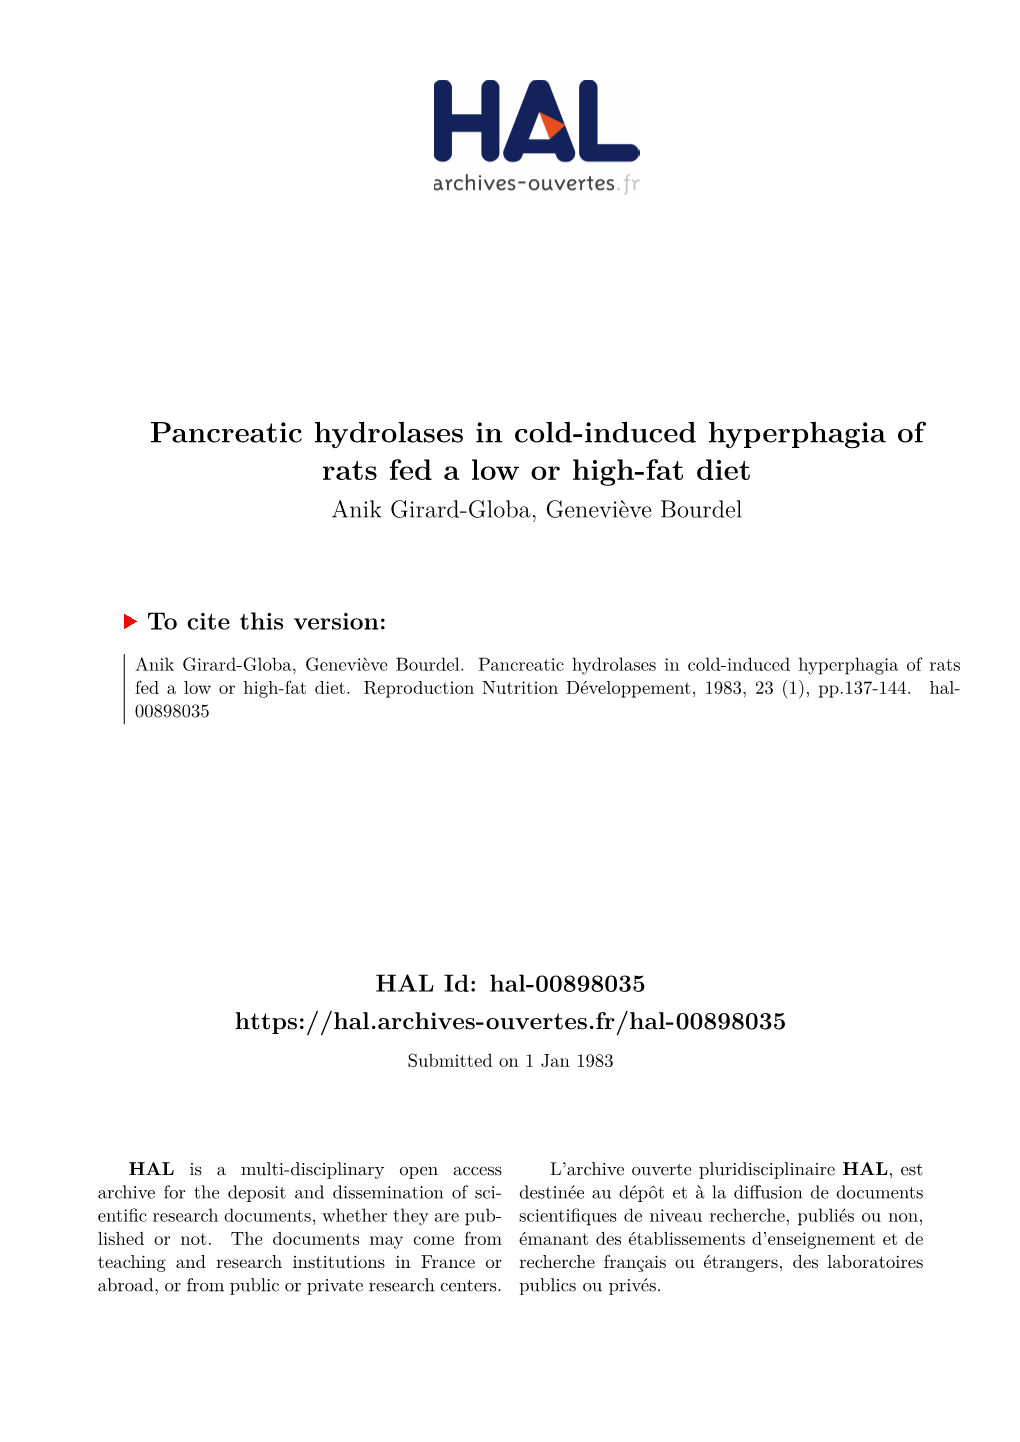 Pancreatic Hydrolases in Cold-Induced Hyperphagia of Rats Fed a Low Or High-Fat Diet Anik Girard-Globa, Geneviève Bourdel